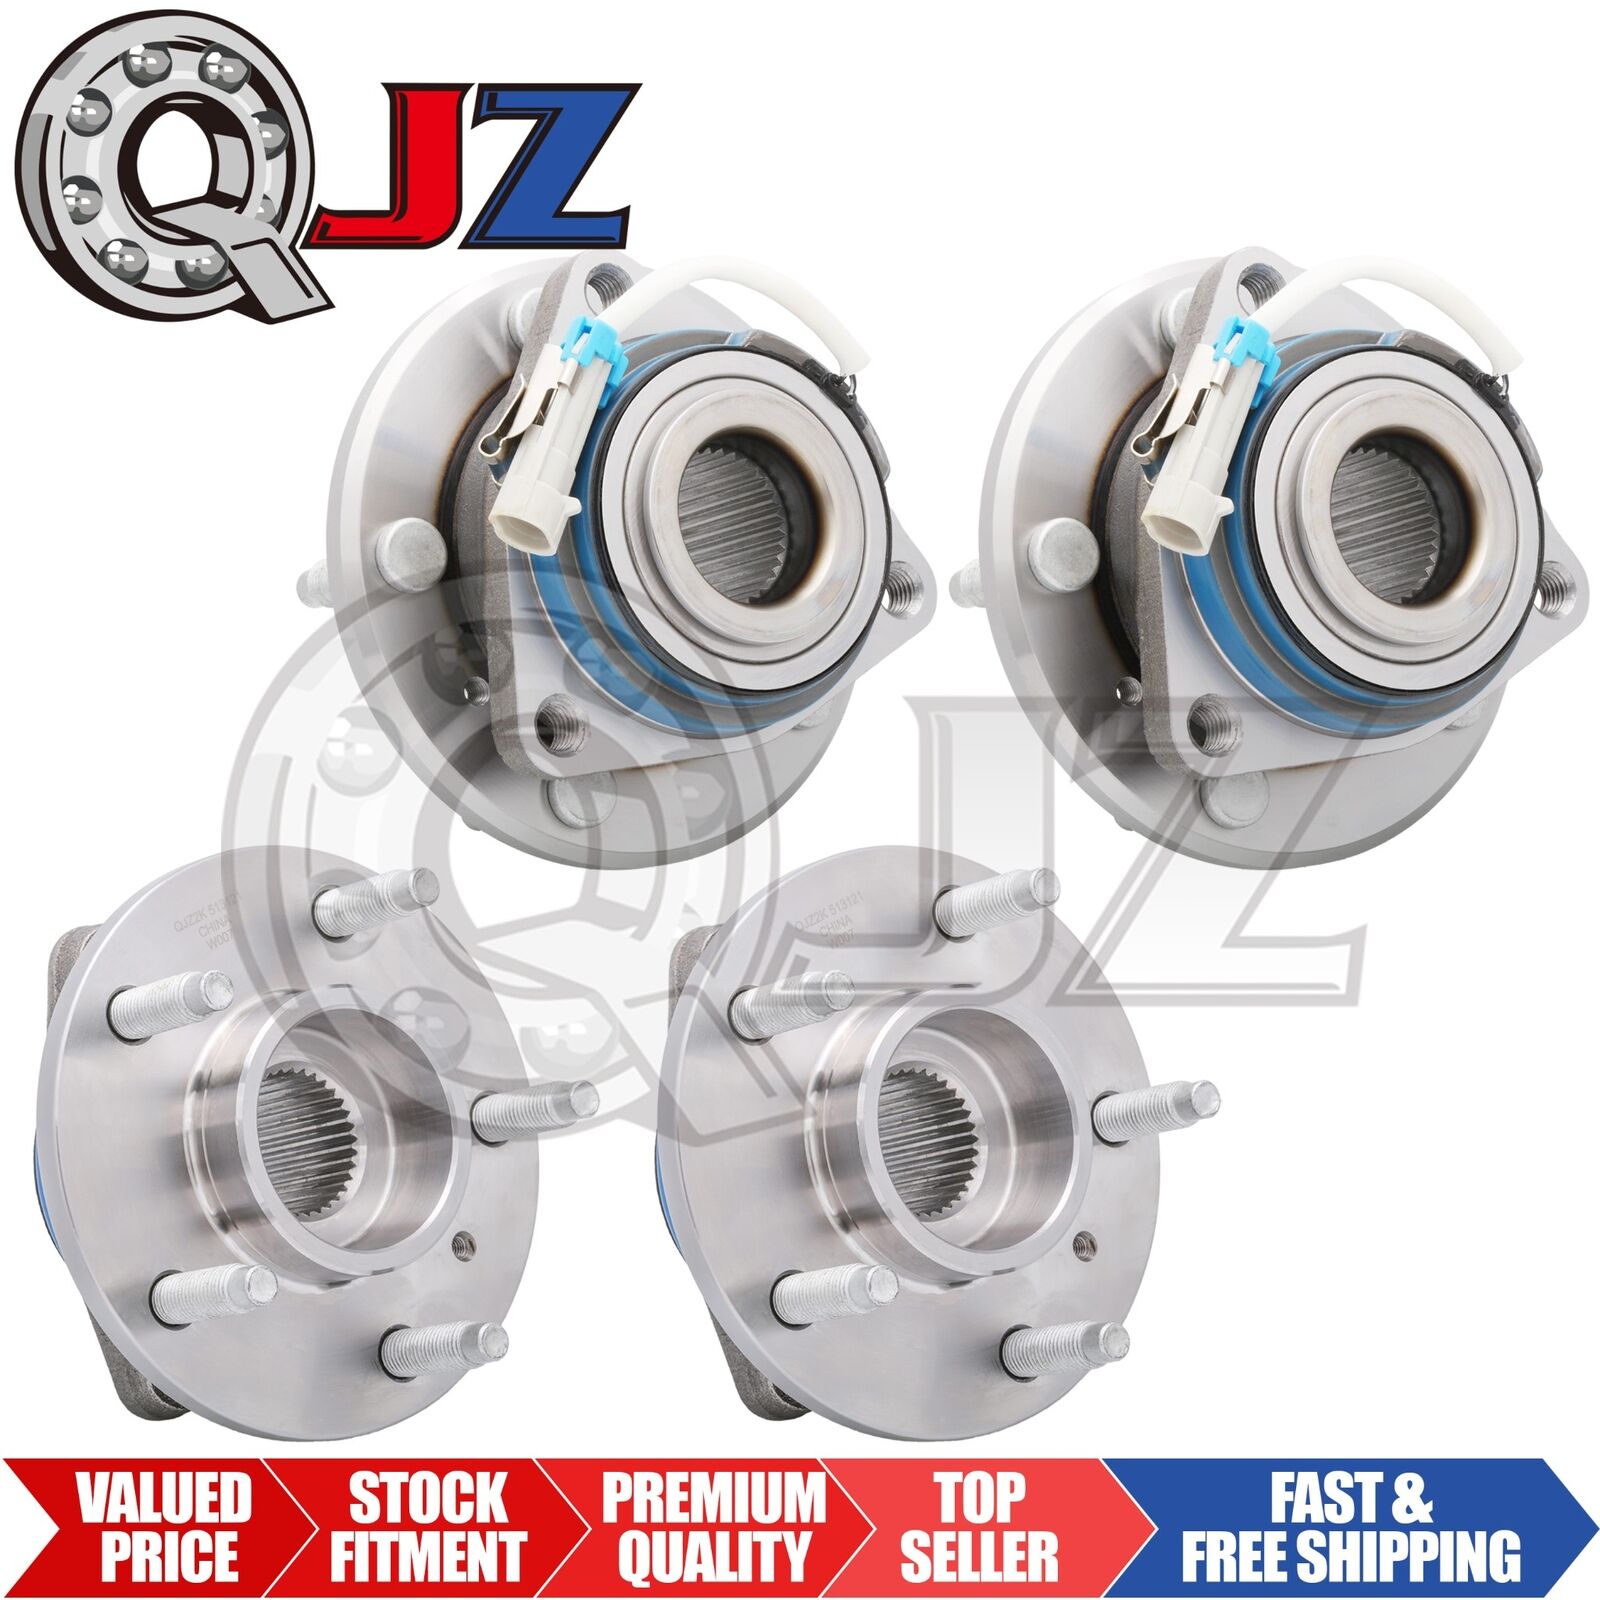 [FRONT(2) & REAR(2)] New Wheel Hub For Oldsmobile 2002-2004 Silhouette 3.4L AWD